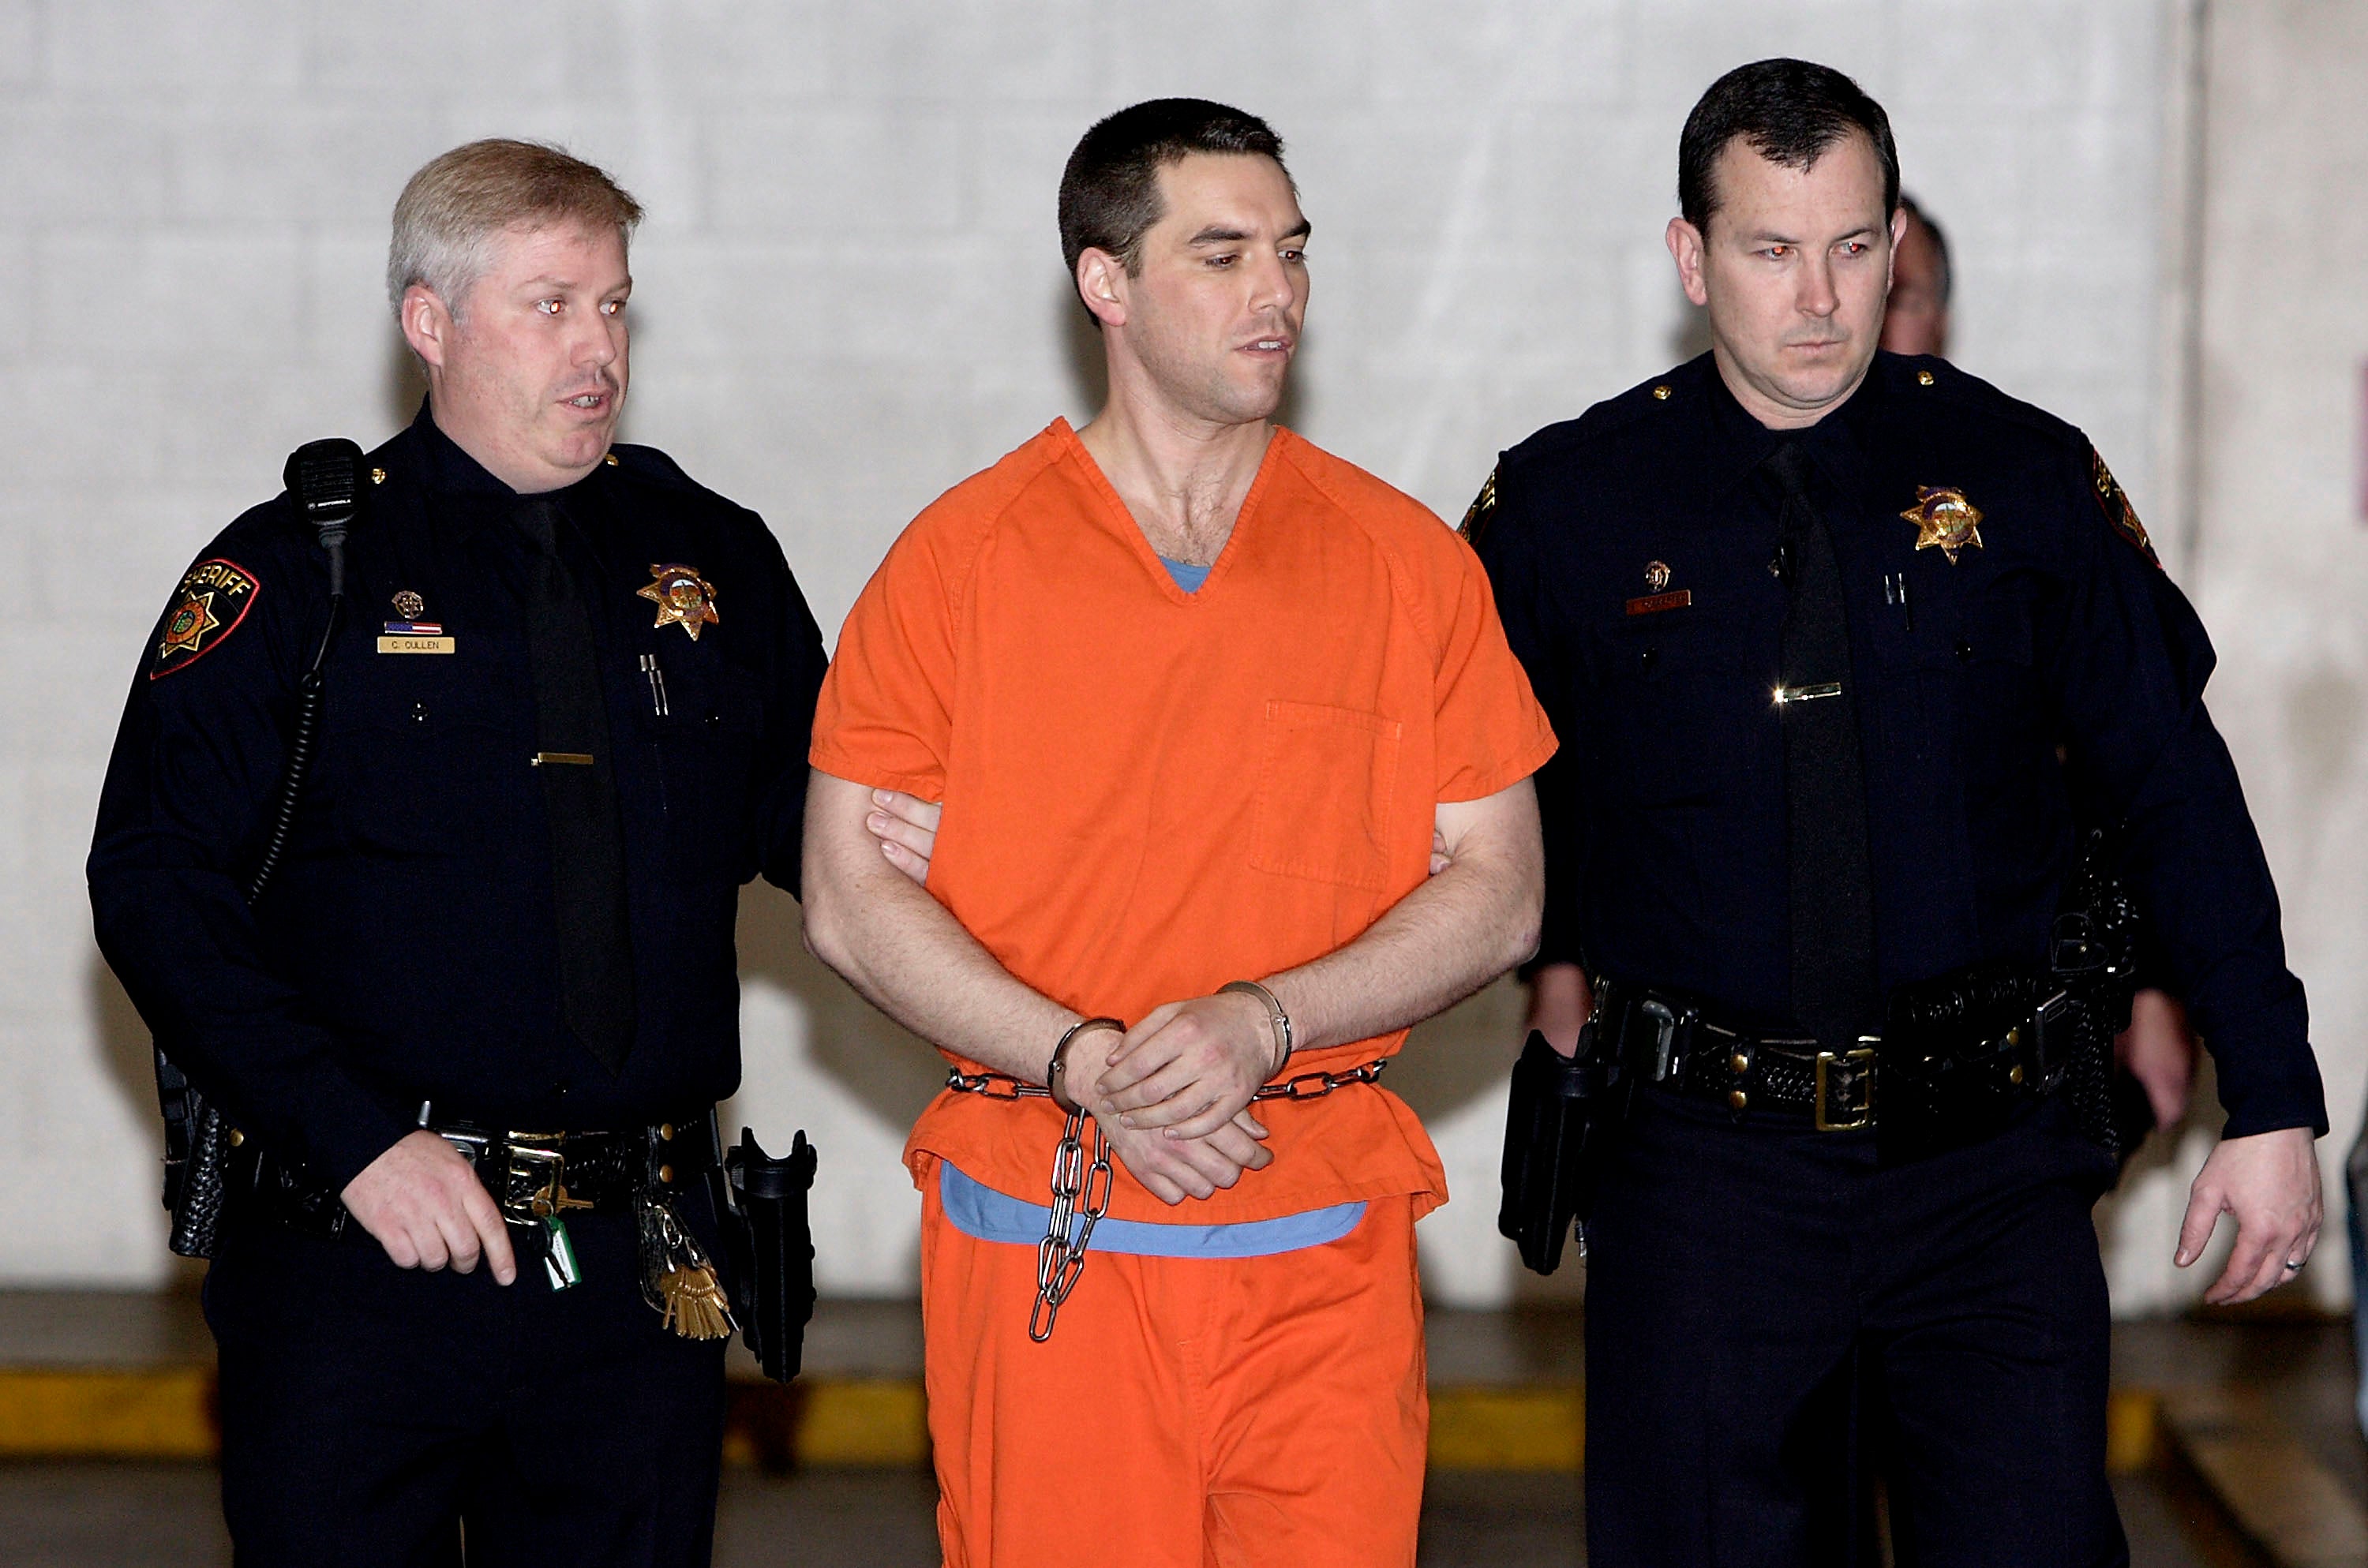 Scott Peterson received Covid unemployment benefits from the state of California despite being on death row for the murder of his wife and unborn son, says a report